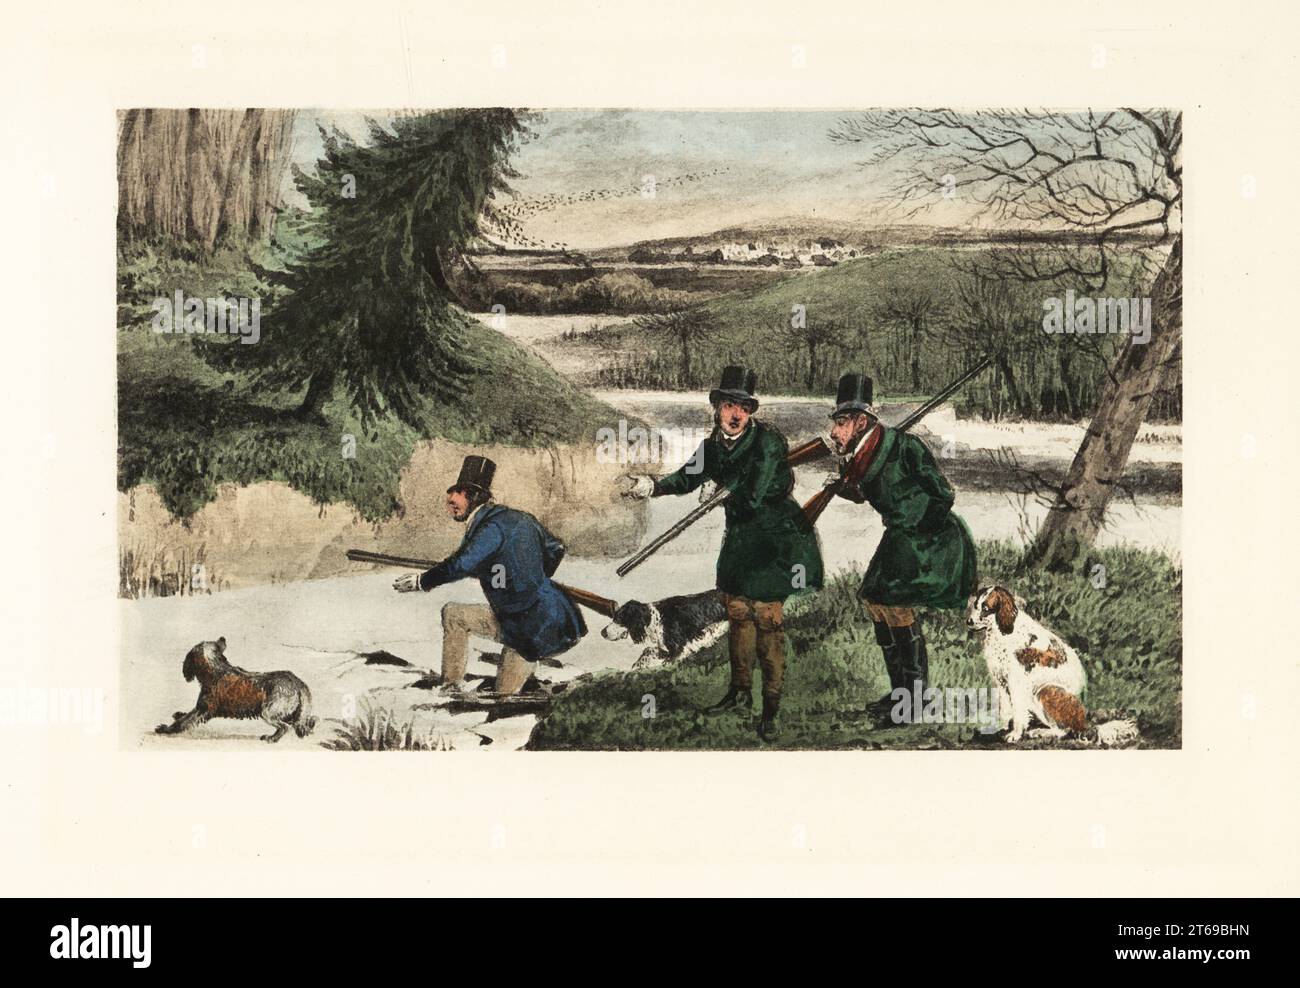 Victorian gentlemen hunting ducks with guns and dogs on a frozen river. Mytton shooting in winter. Chromolithographic facsimile of an illustration by Henry Thomas Alken from Memoirs of the Life of the Late John Mytton by Nimrod aka Charles James Apperley, Kegan Paul, London, 1900. Stock Photo